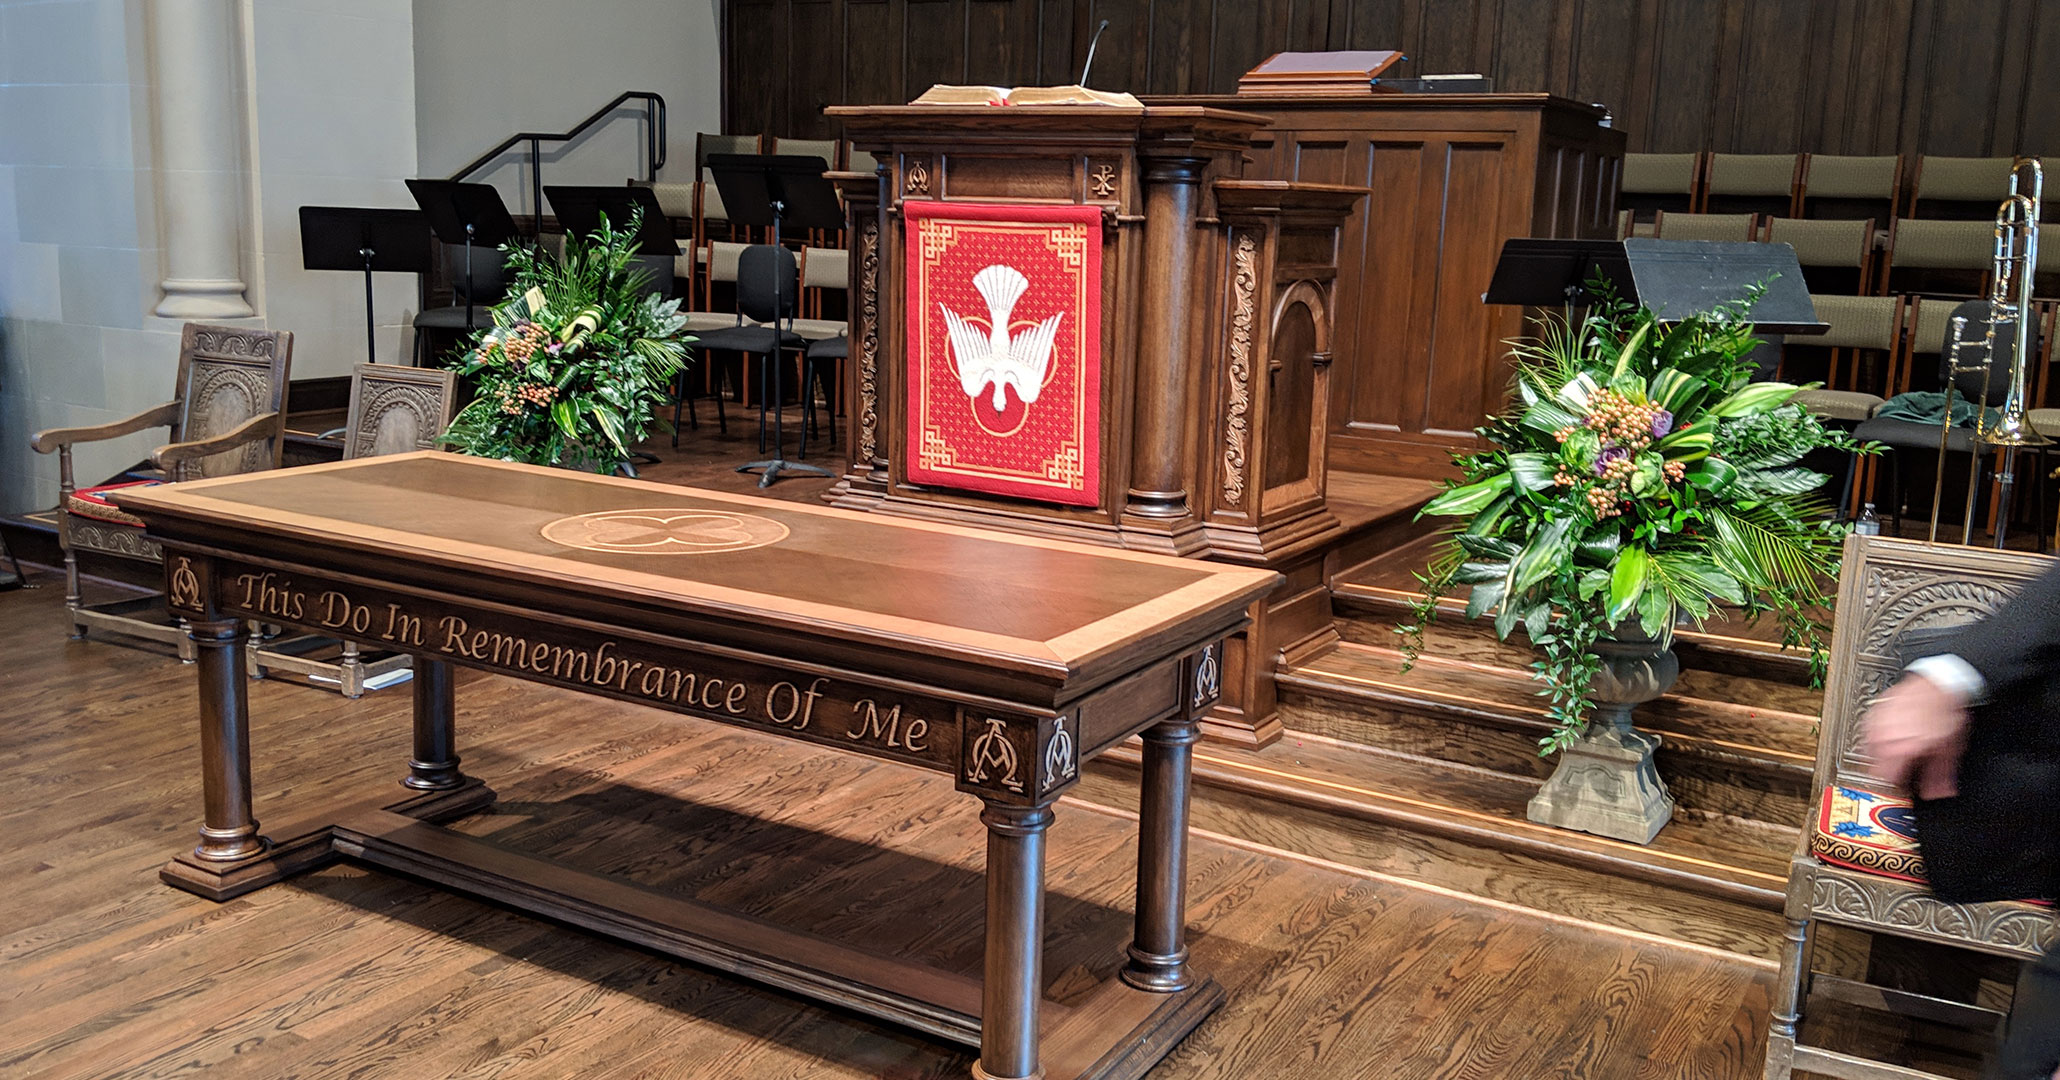 Historic Preservationists and Interior Designers at Boudreaux worked with First Presbyterian Church in Spartanburg, SC to customize the alter design.